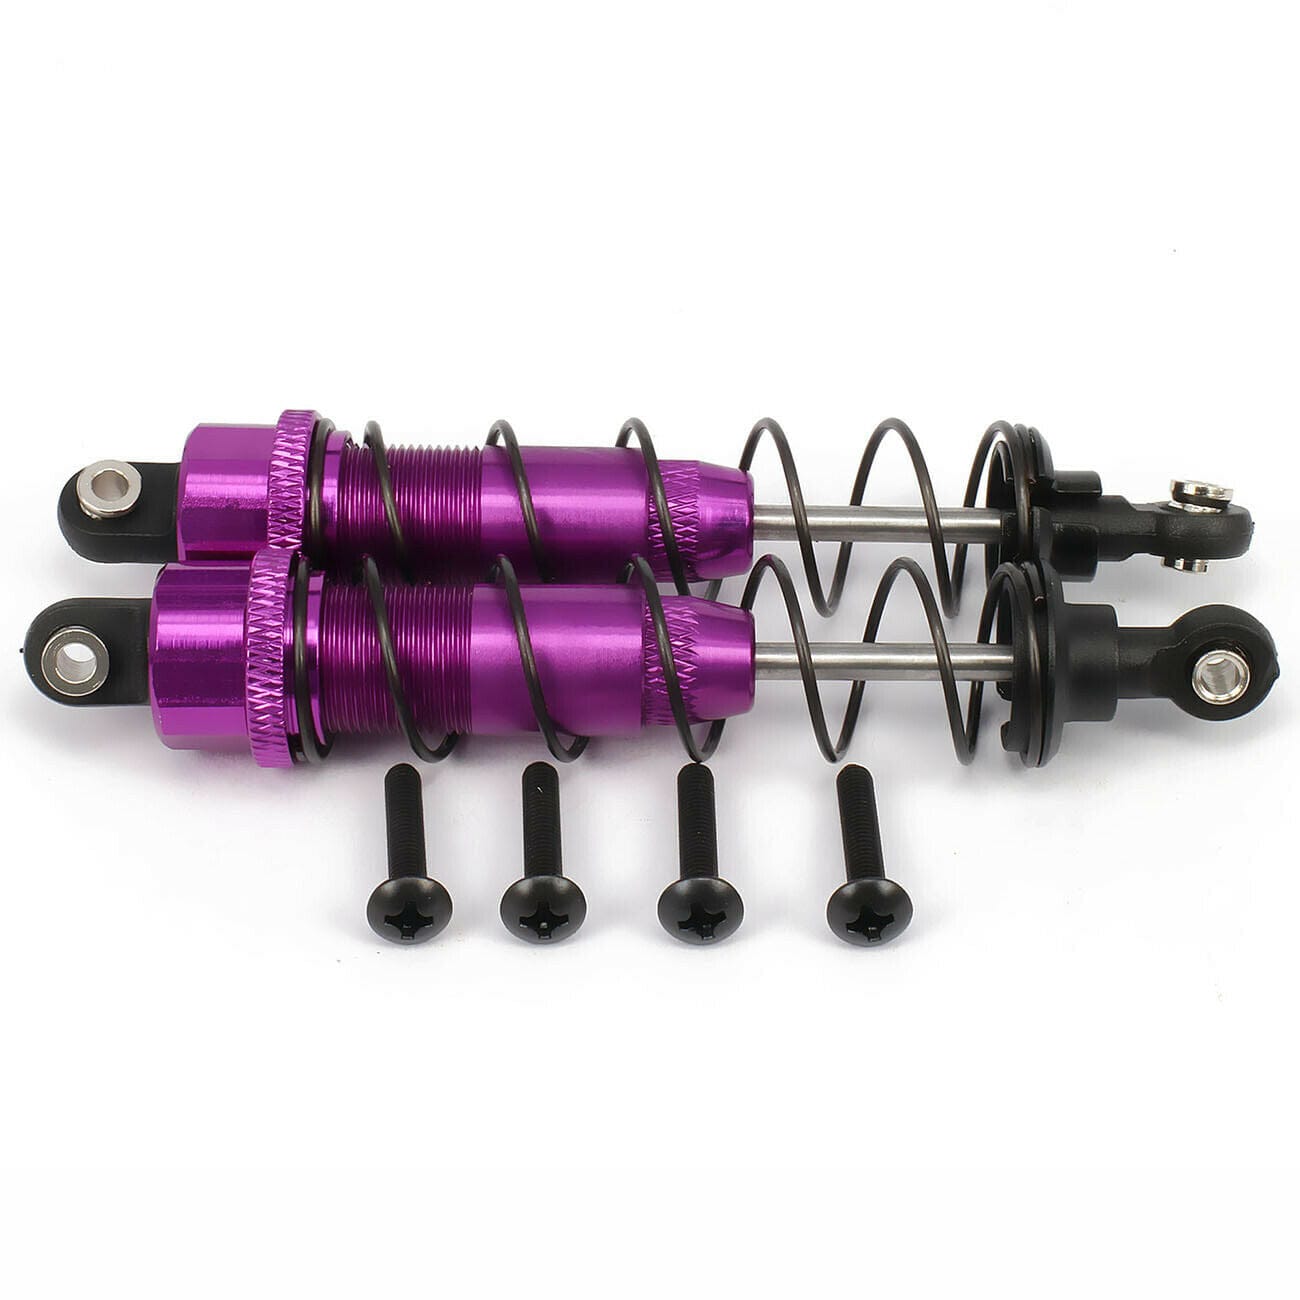 RCAWD AXIAL UPGRADE PARTS Purple 100mm RC Shock Absorber Damper For Rc Model Car 1/10 Axial Scx10